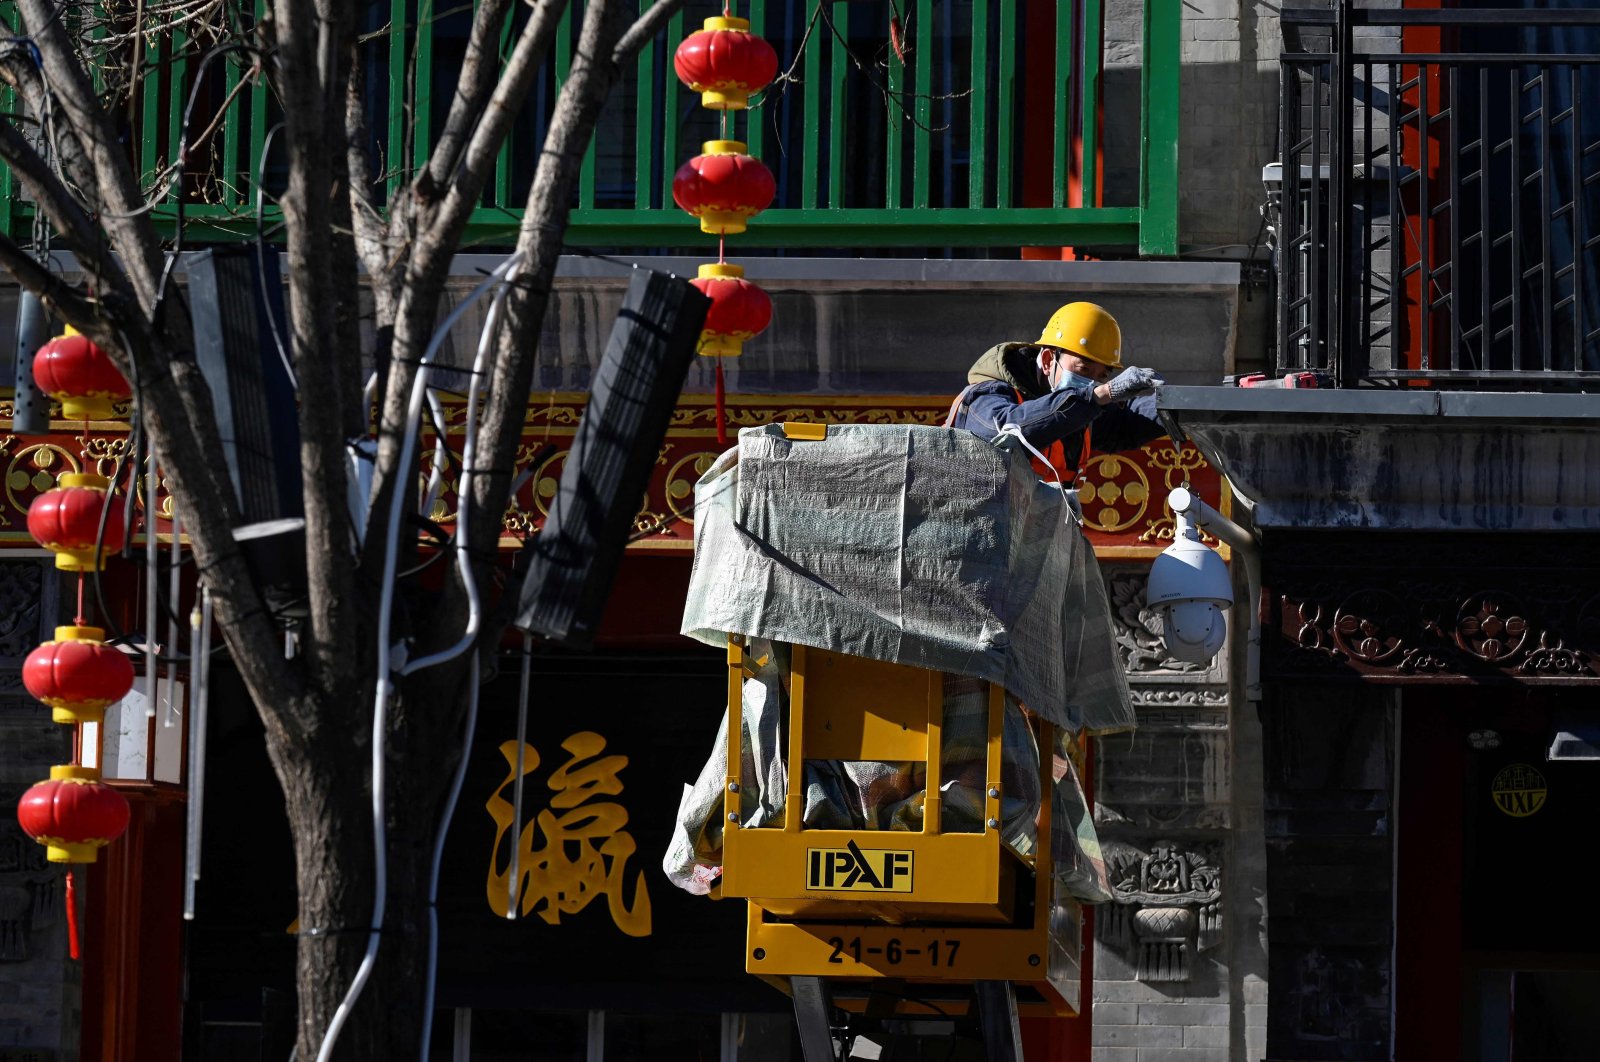 A worker renovates a shopfront along a business street in Beijing, China, Jan. 13, 2022. (AFP Photo)